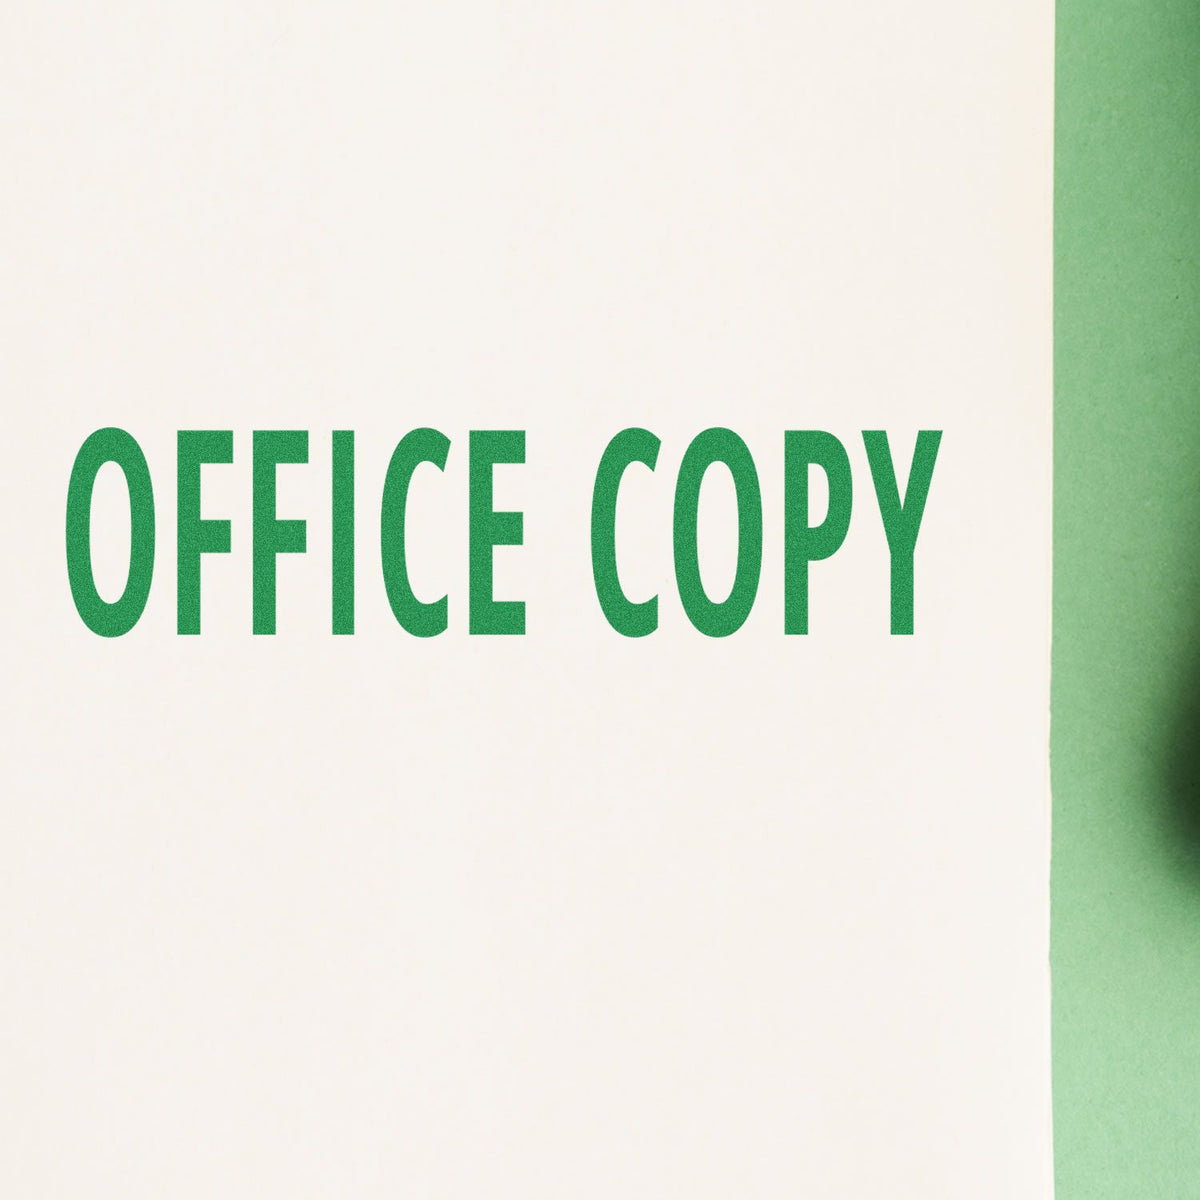 Office Copy Rubber Stamp  In Use